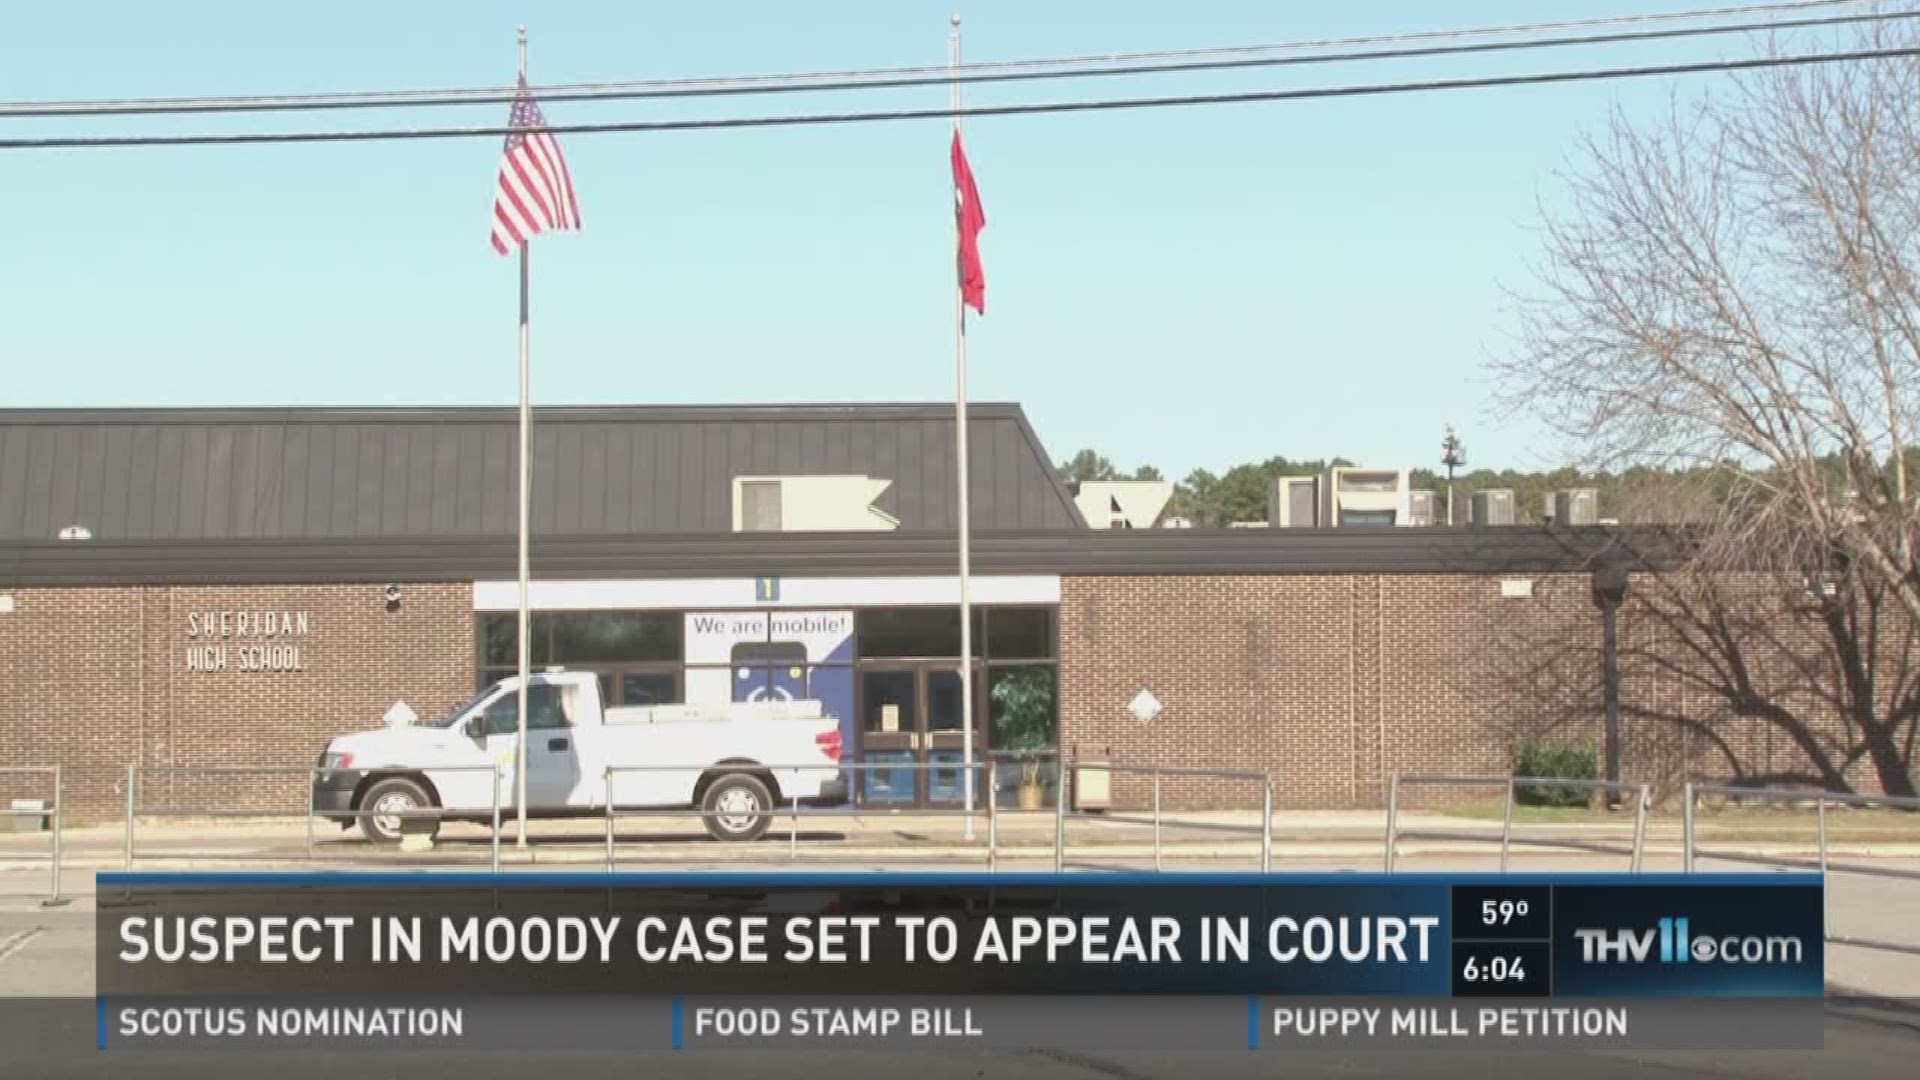 Suspect in Moody case set to appear in court